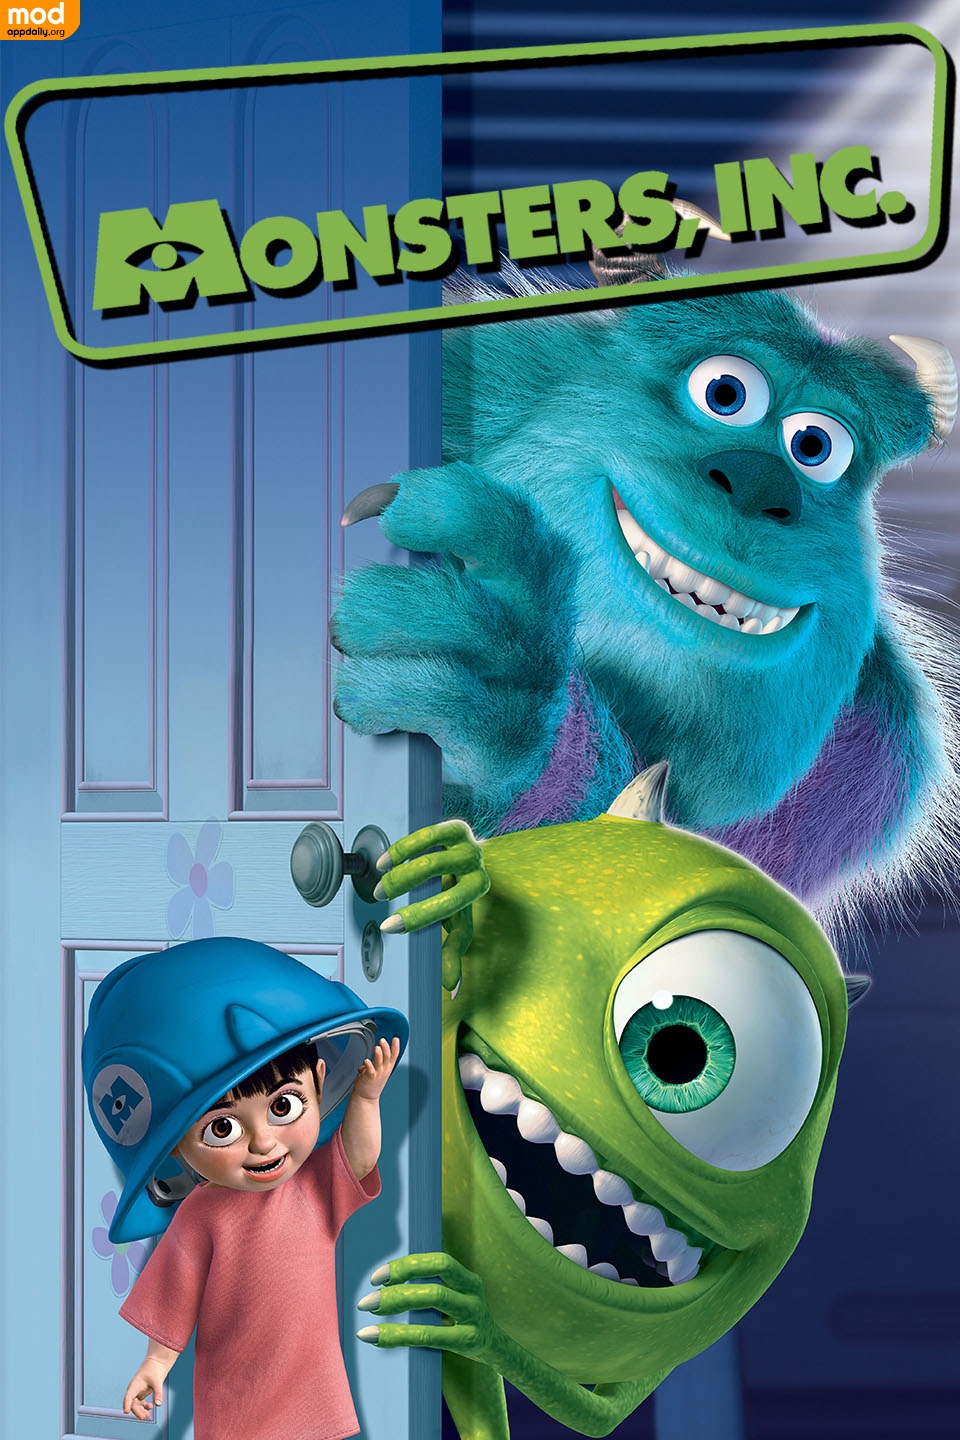 Back in Monstropolis, Sulley confronts Randall in an attempt to save Boo